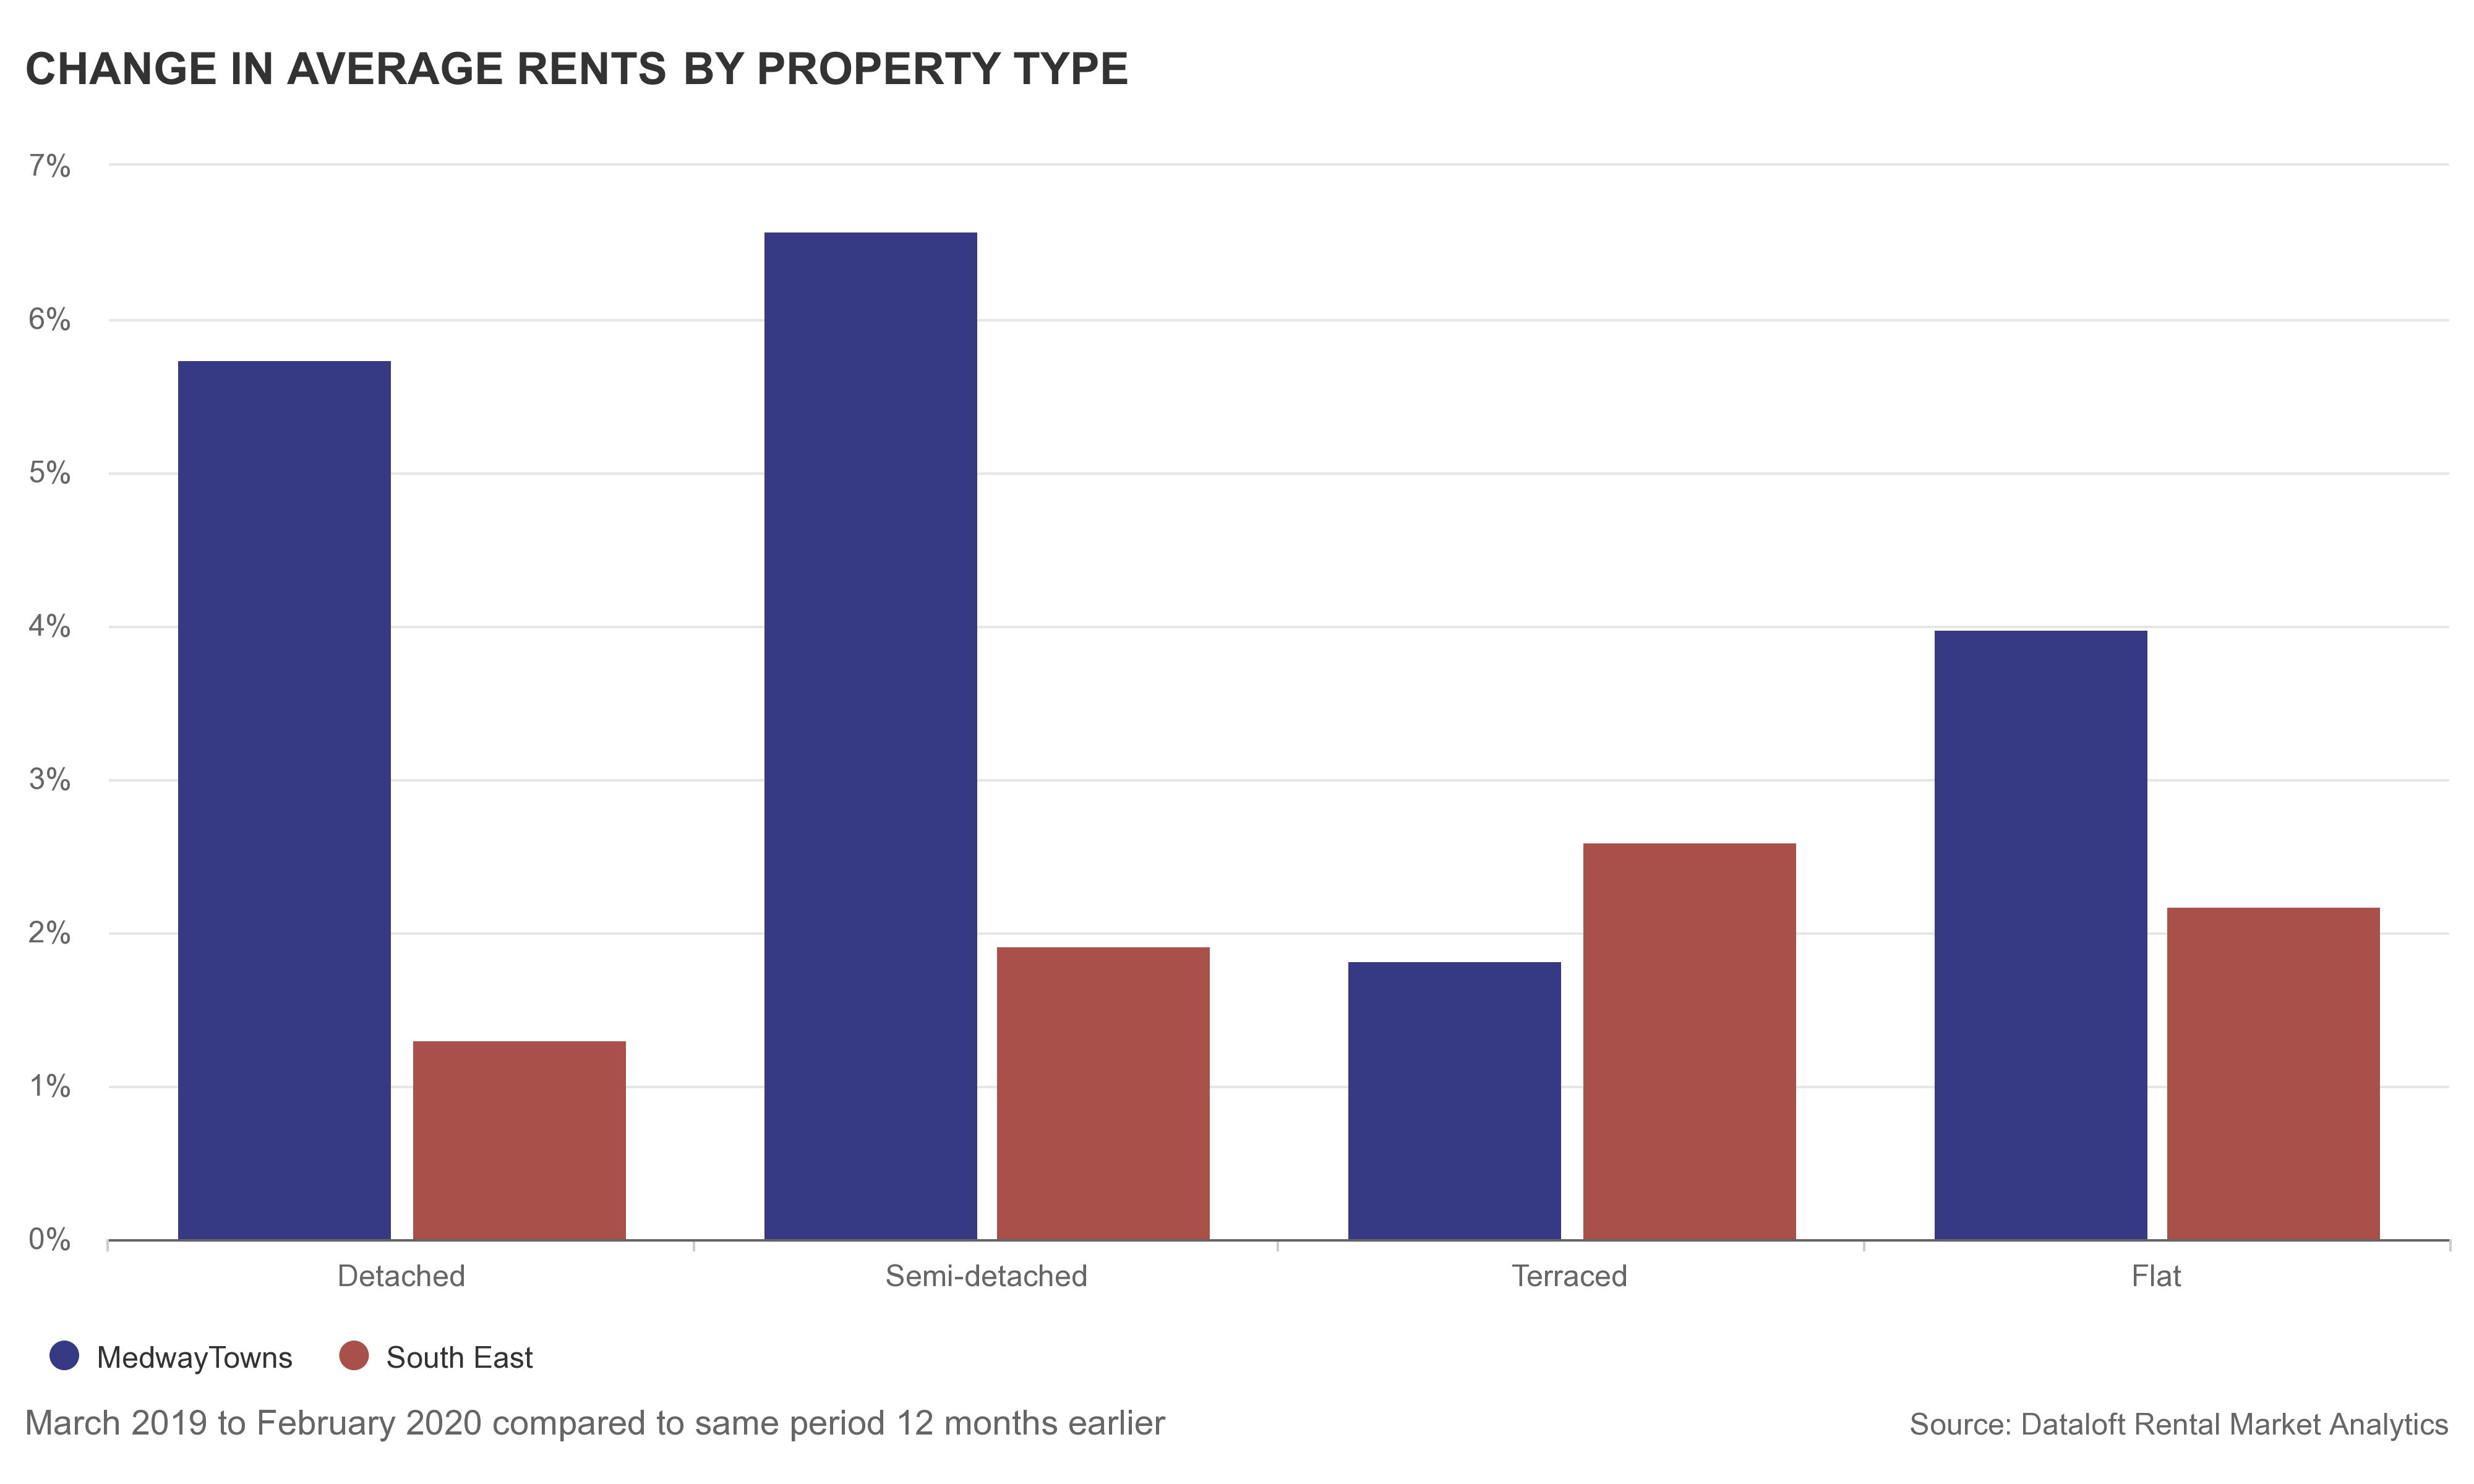 Change in Average Rents